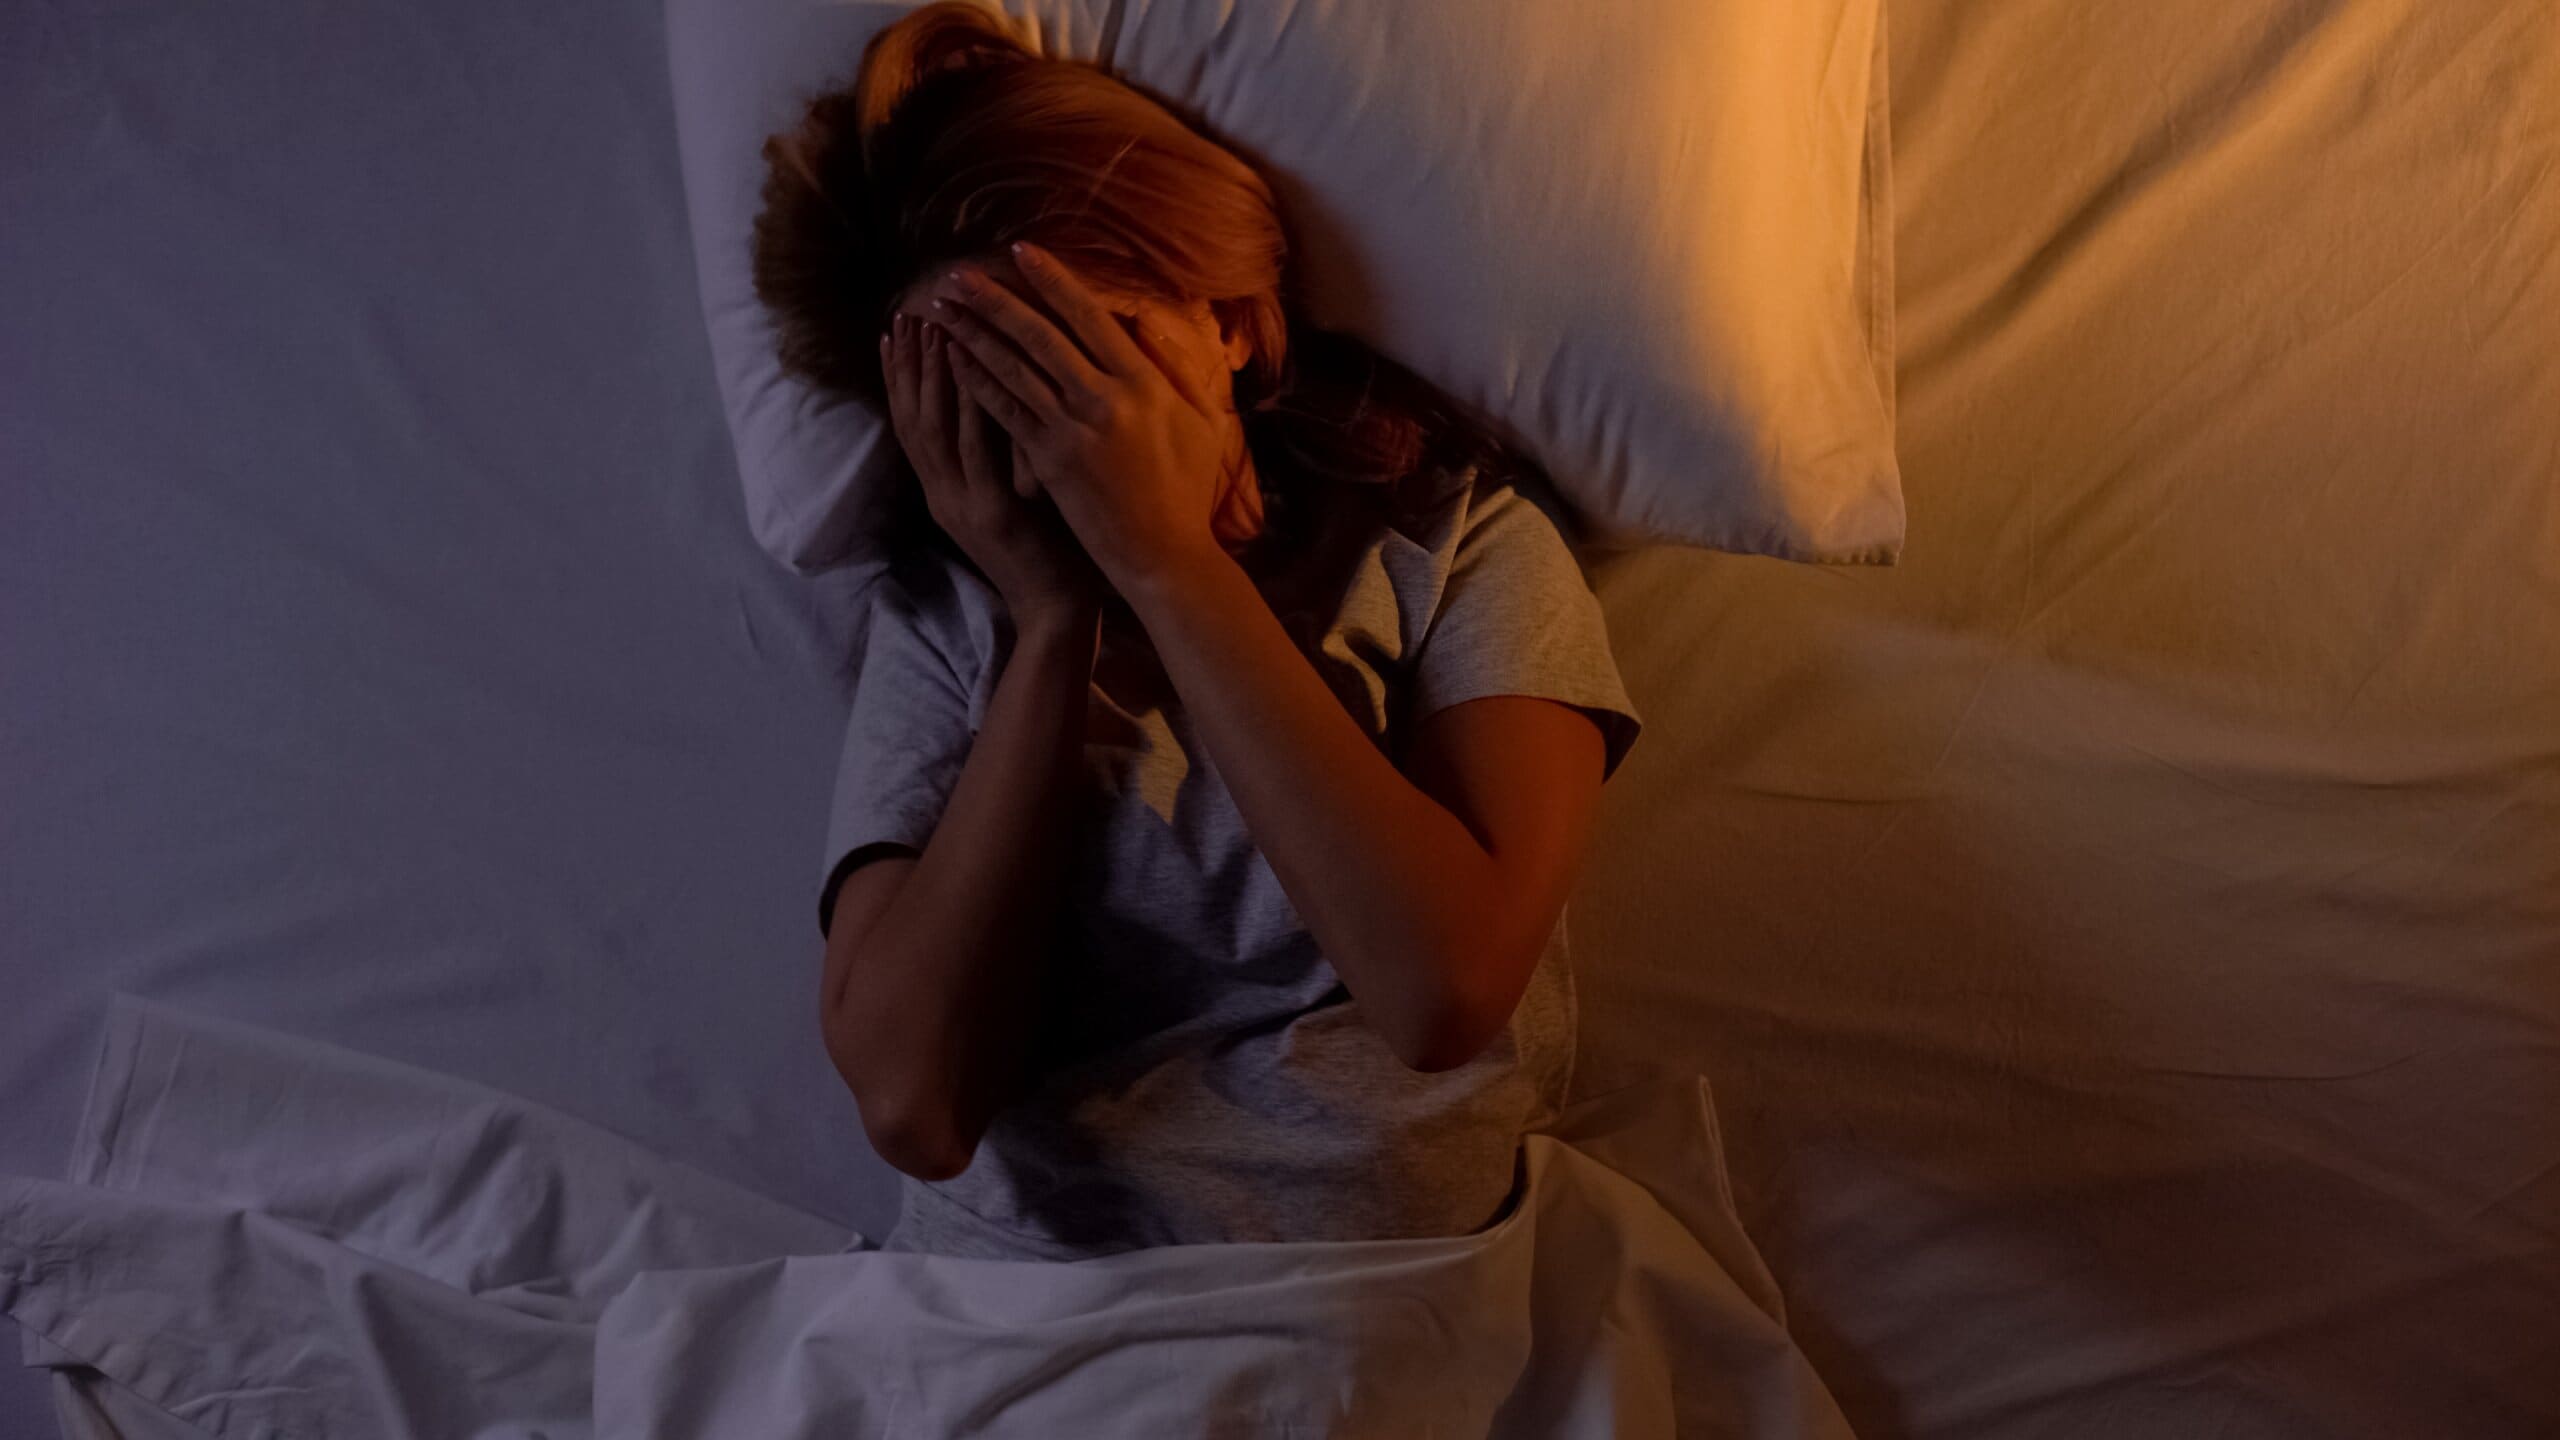 Woman hiding face while lying in bed, after experiencing a night terror.